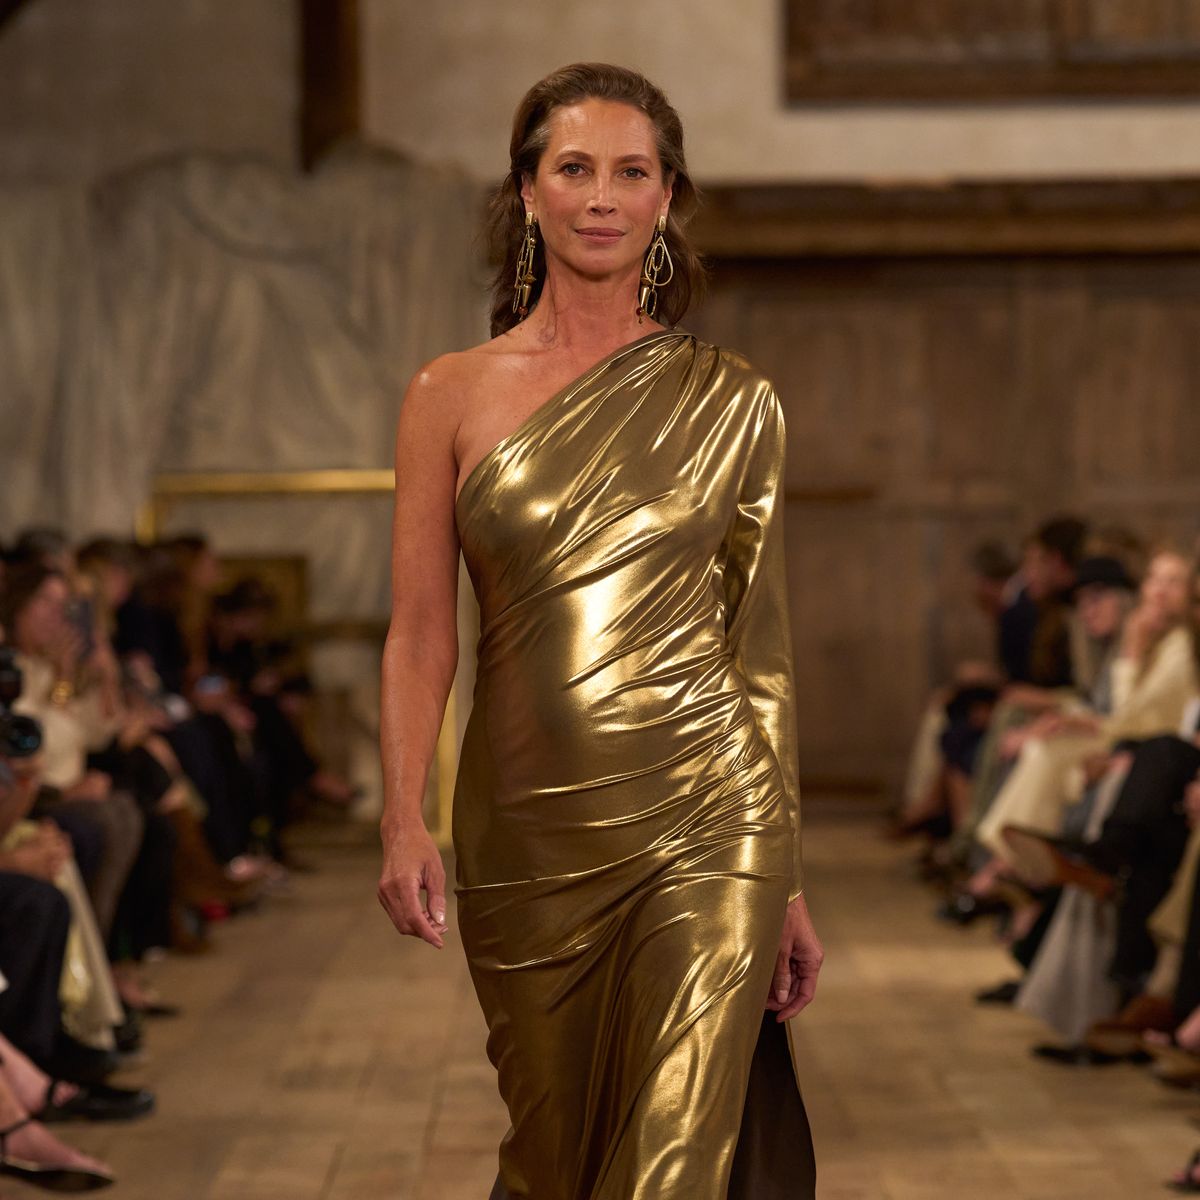 Ralph Lauren unveiled his latest collection at the Museum of